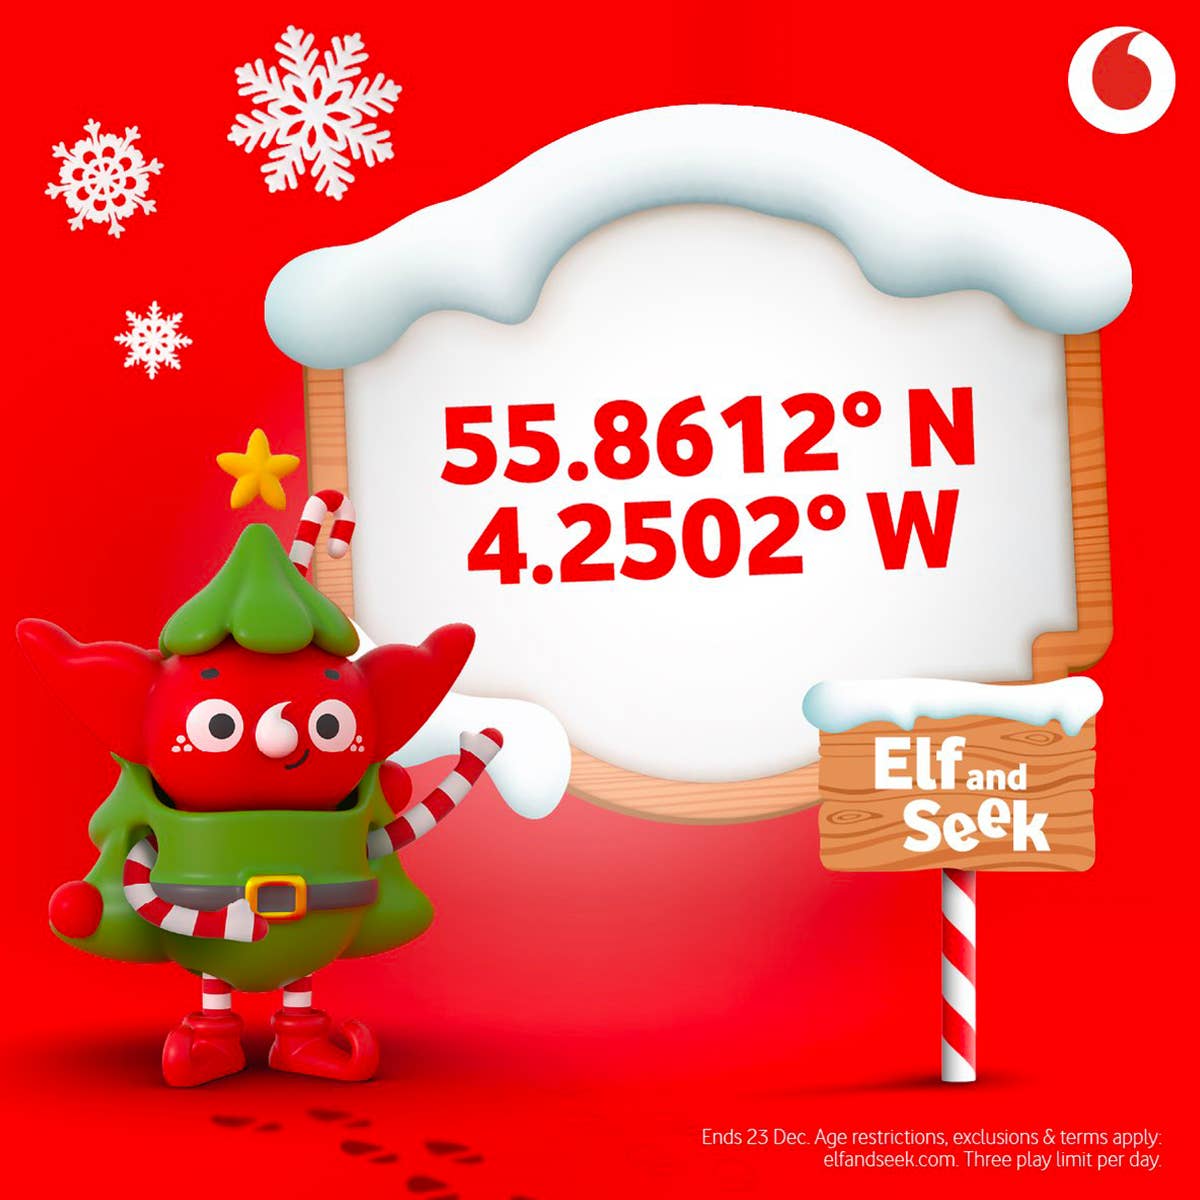 Vodafone launch ‘Elf and Seek’ augmented reality game to bring festive cheer this Christmas